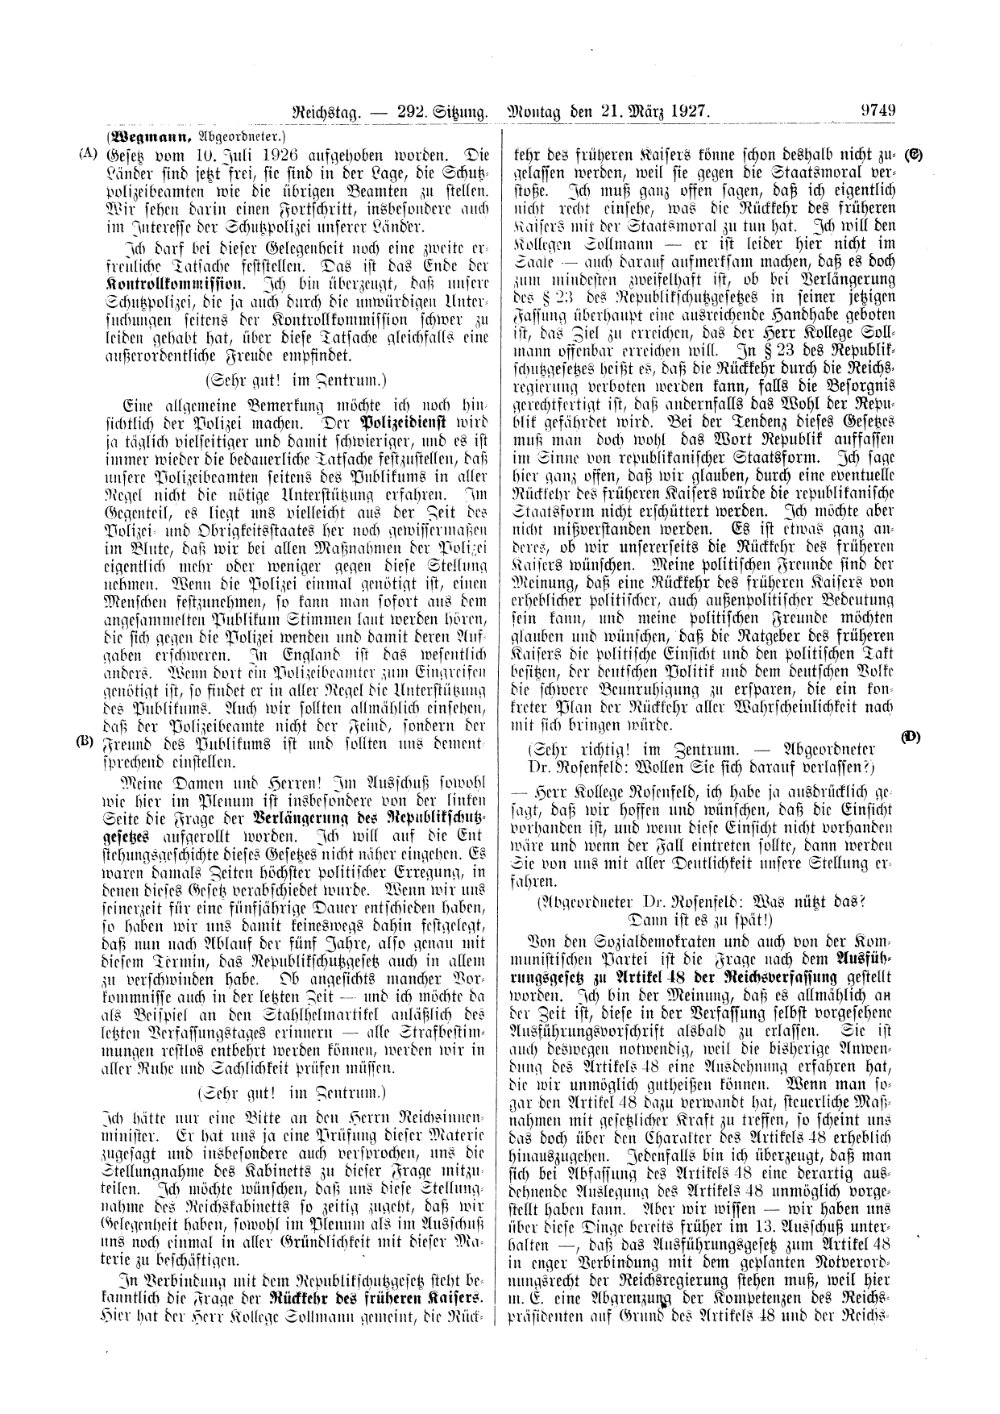 Scan of page 9749